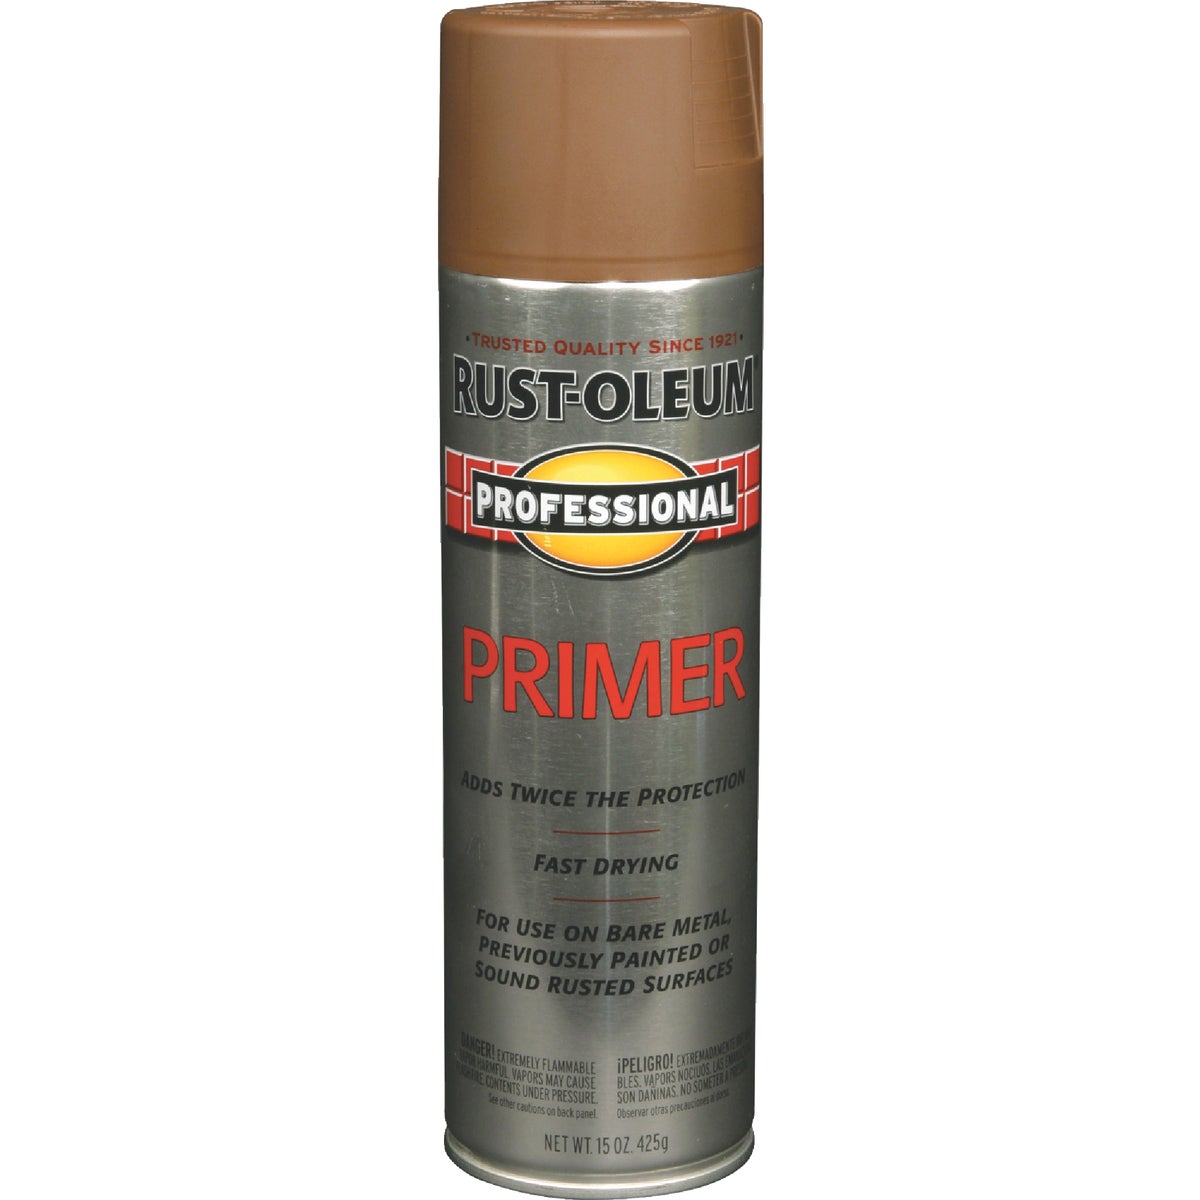 Item 783236, Rust-Oleum professional primer spray provides twice the protection of 